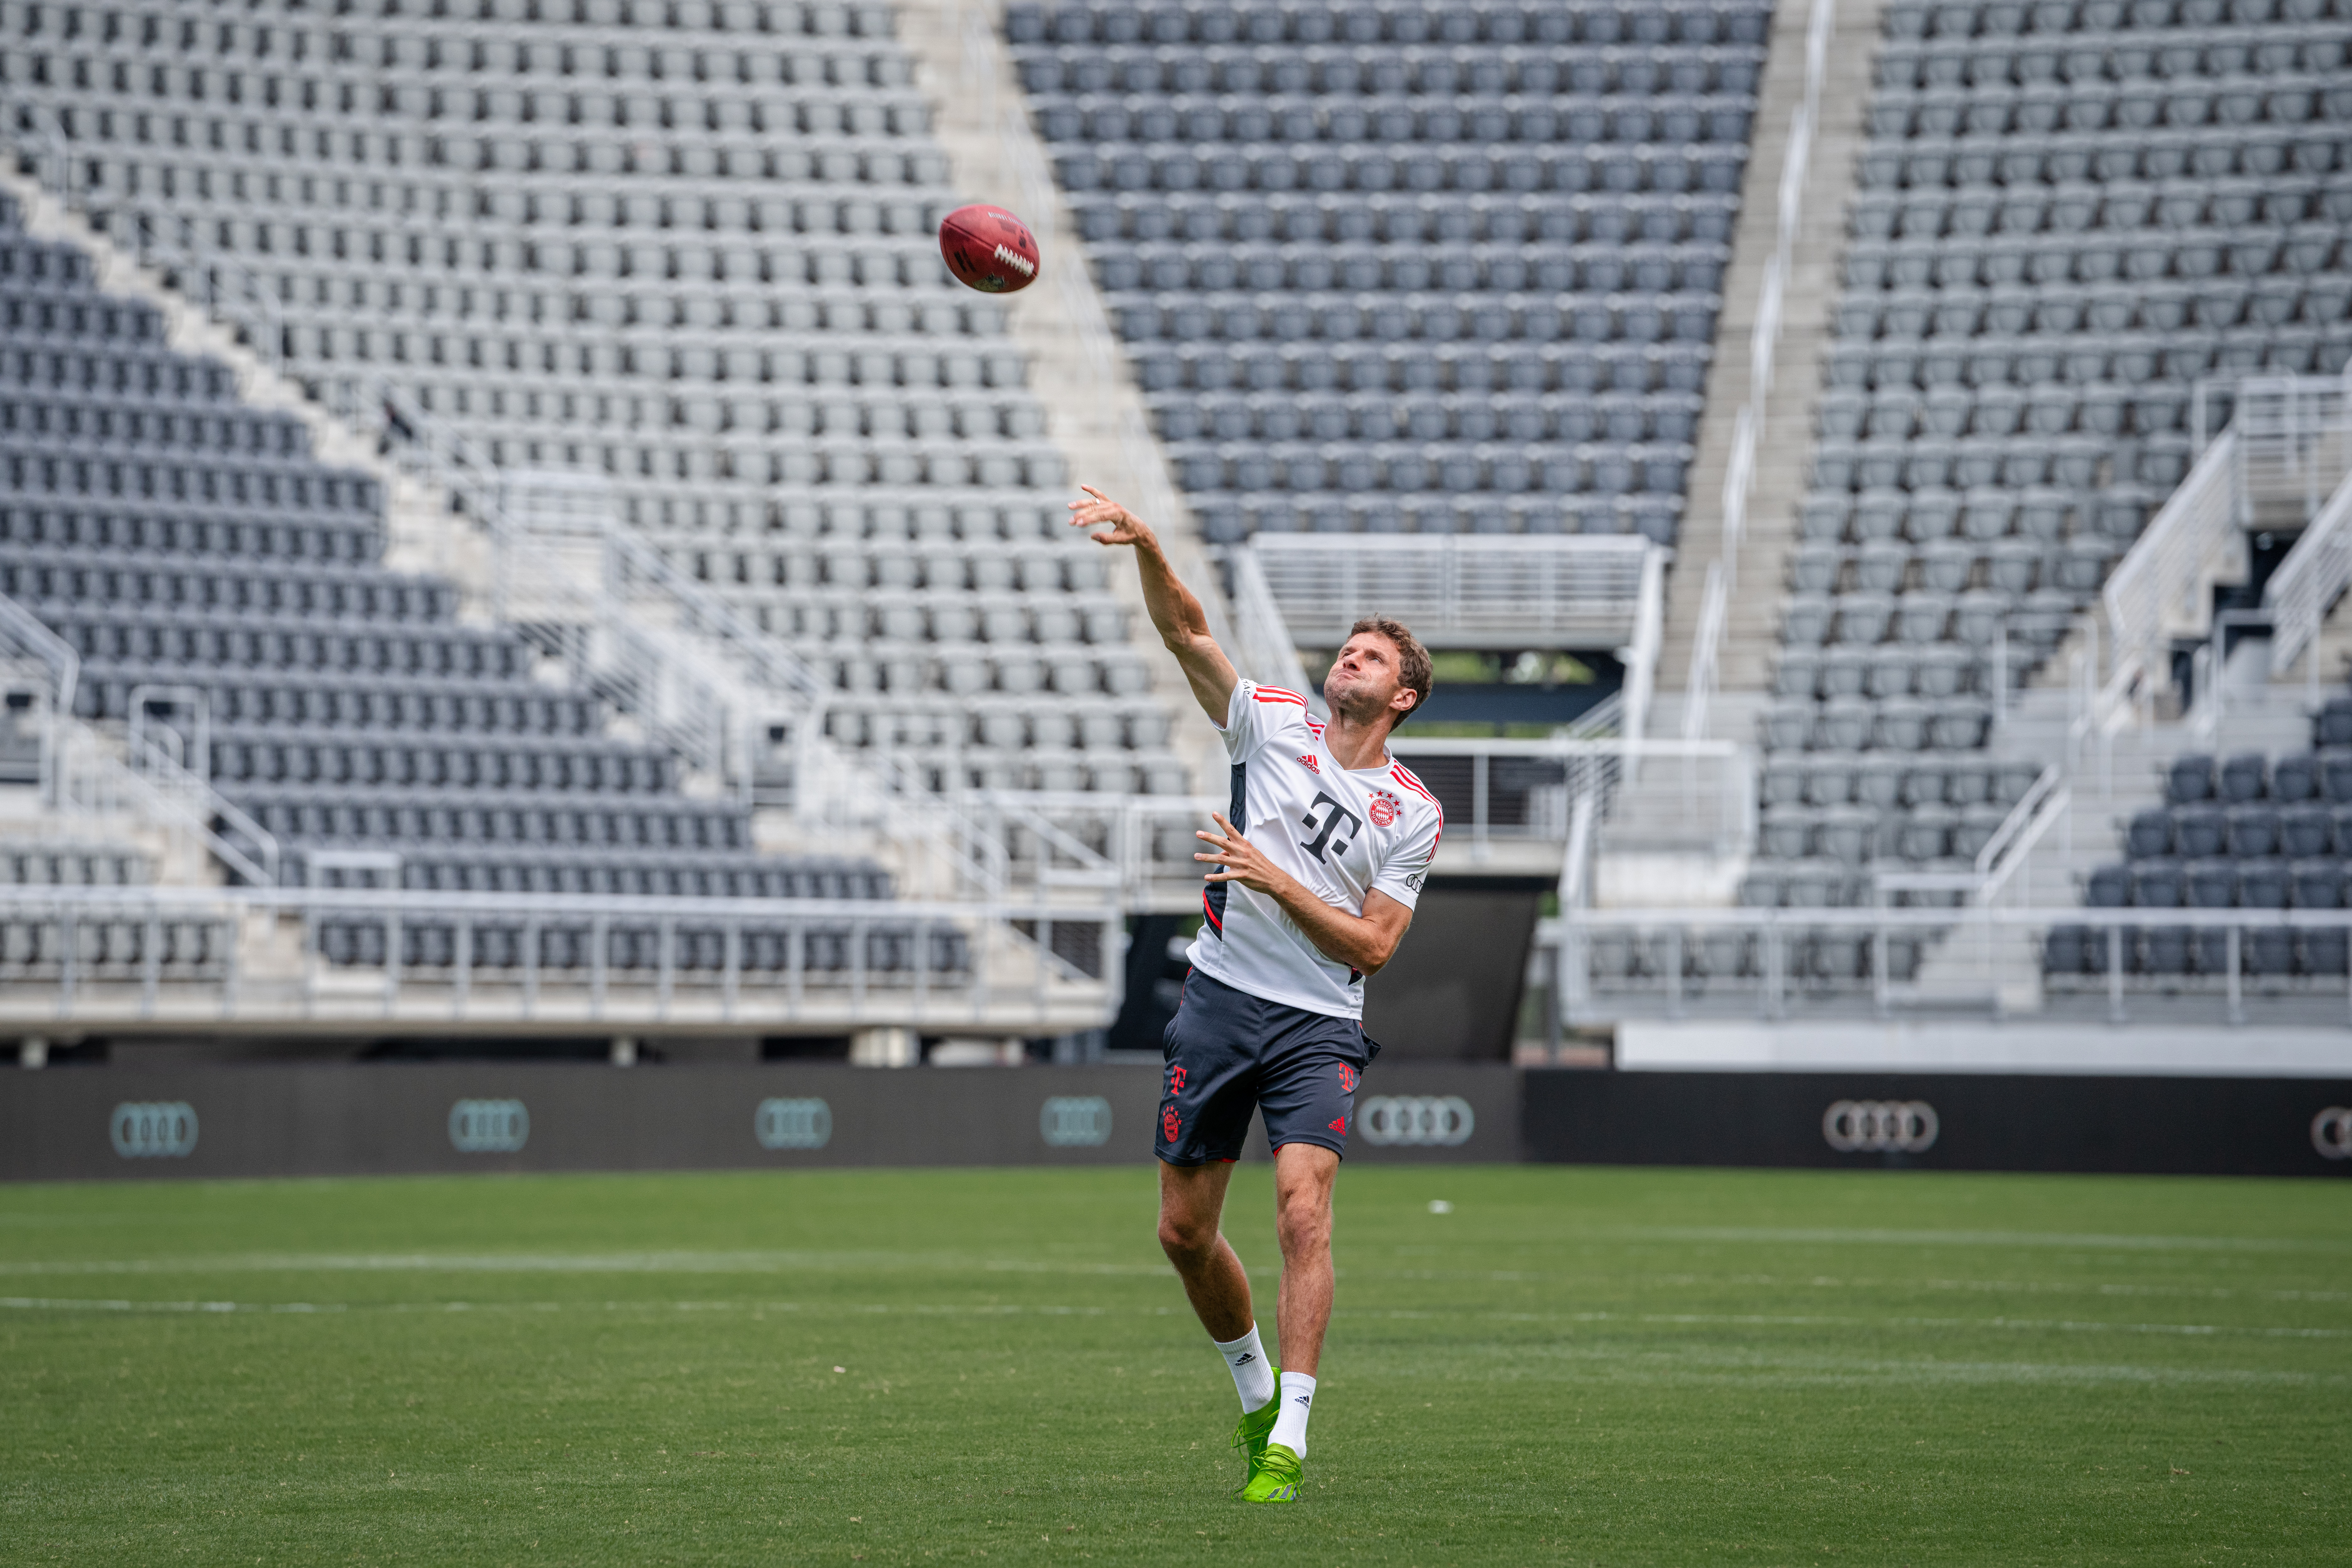 Müller, arm at full stretch, releases an American football during training in Washington, D.C.